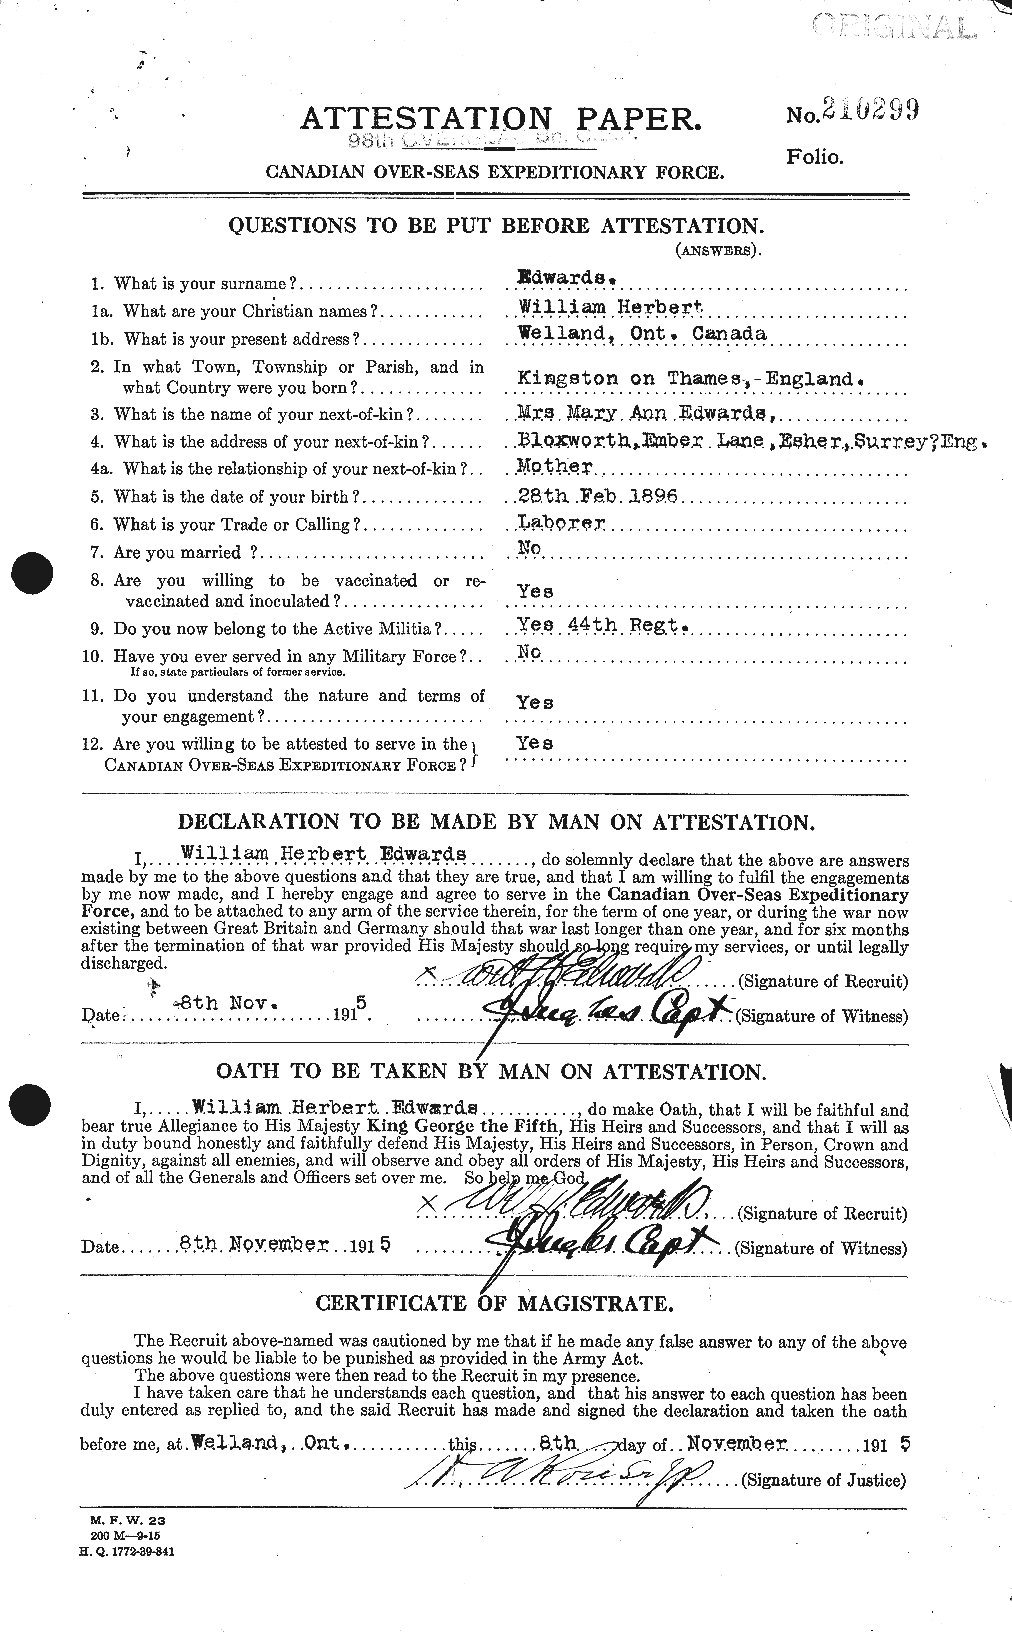 Personnel Records of the First World War - CEF 310436a